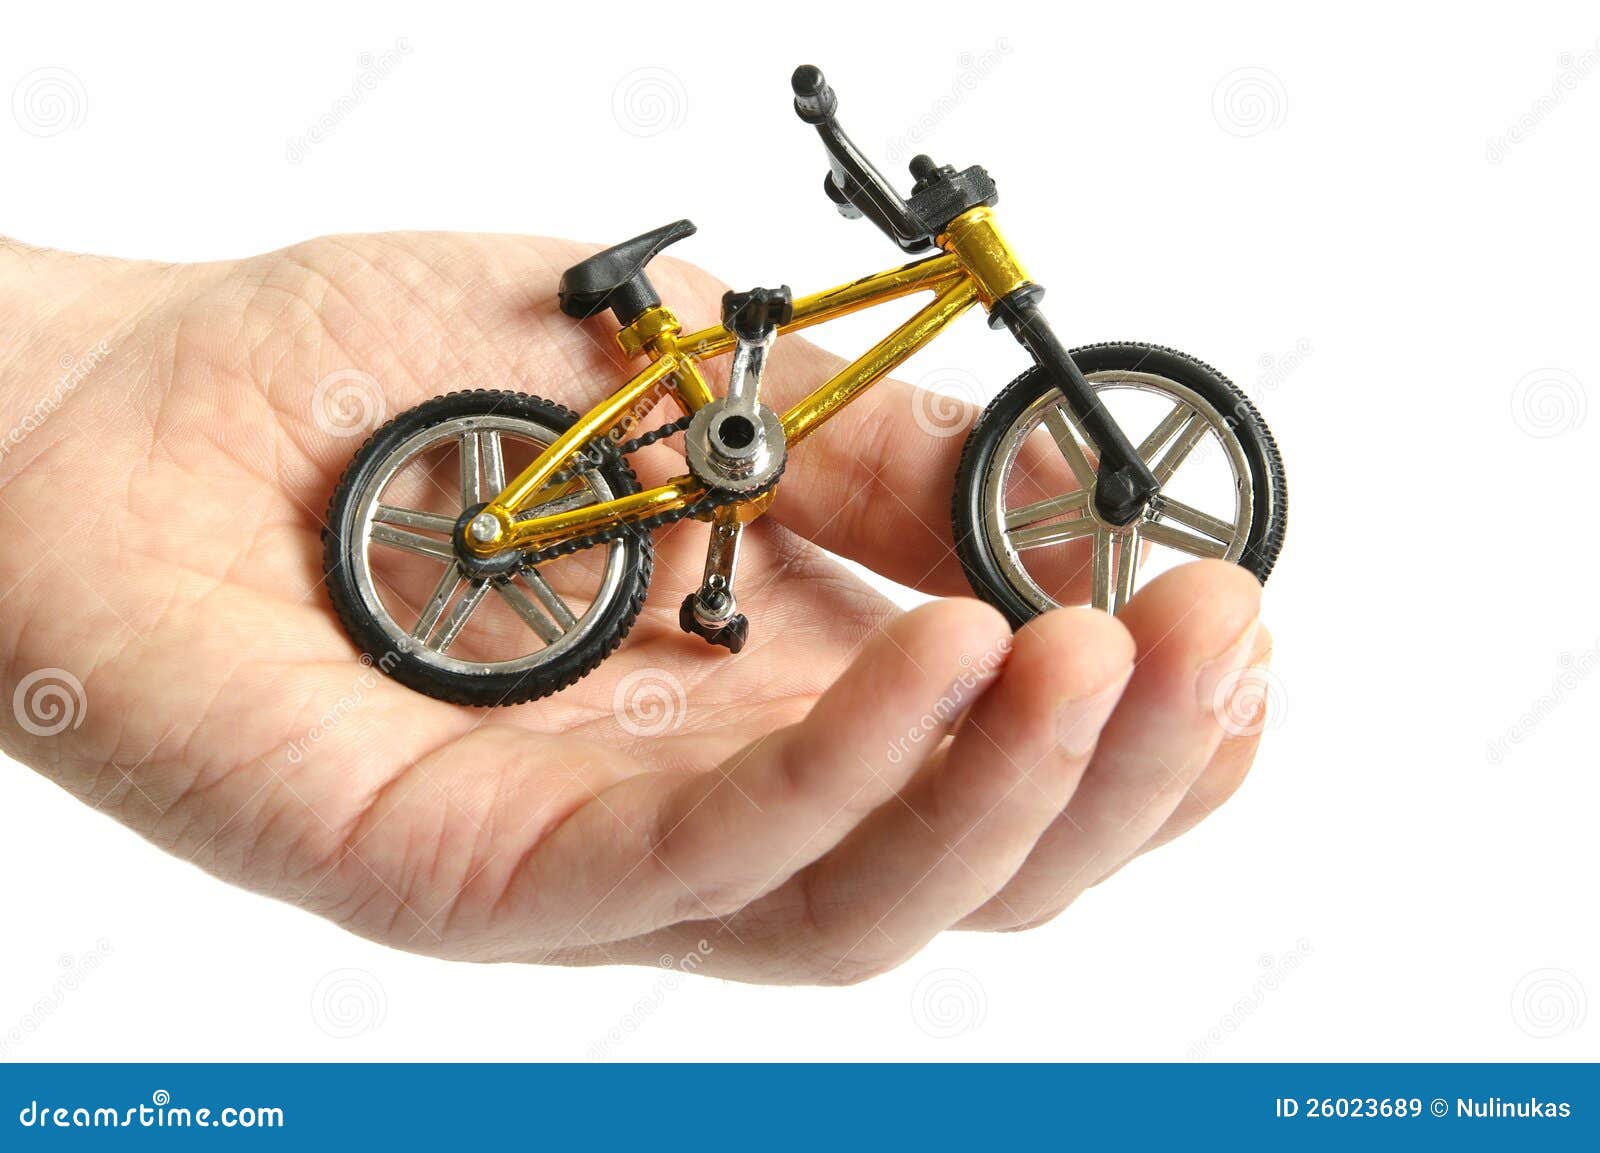 A Small Toy Bicycle Royalty Free Stock Images - Image ...